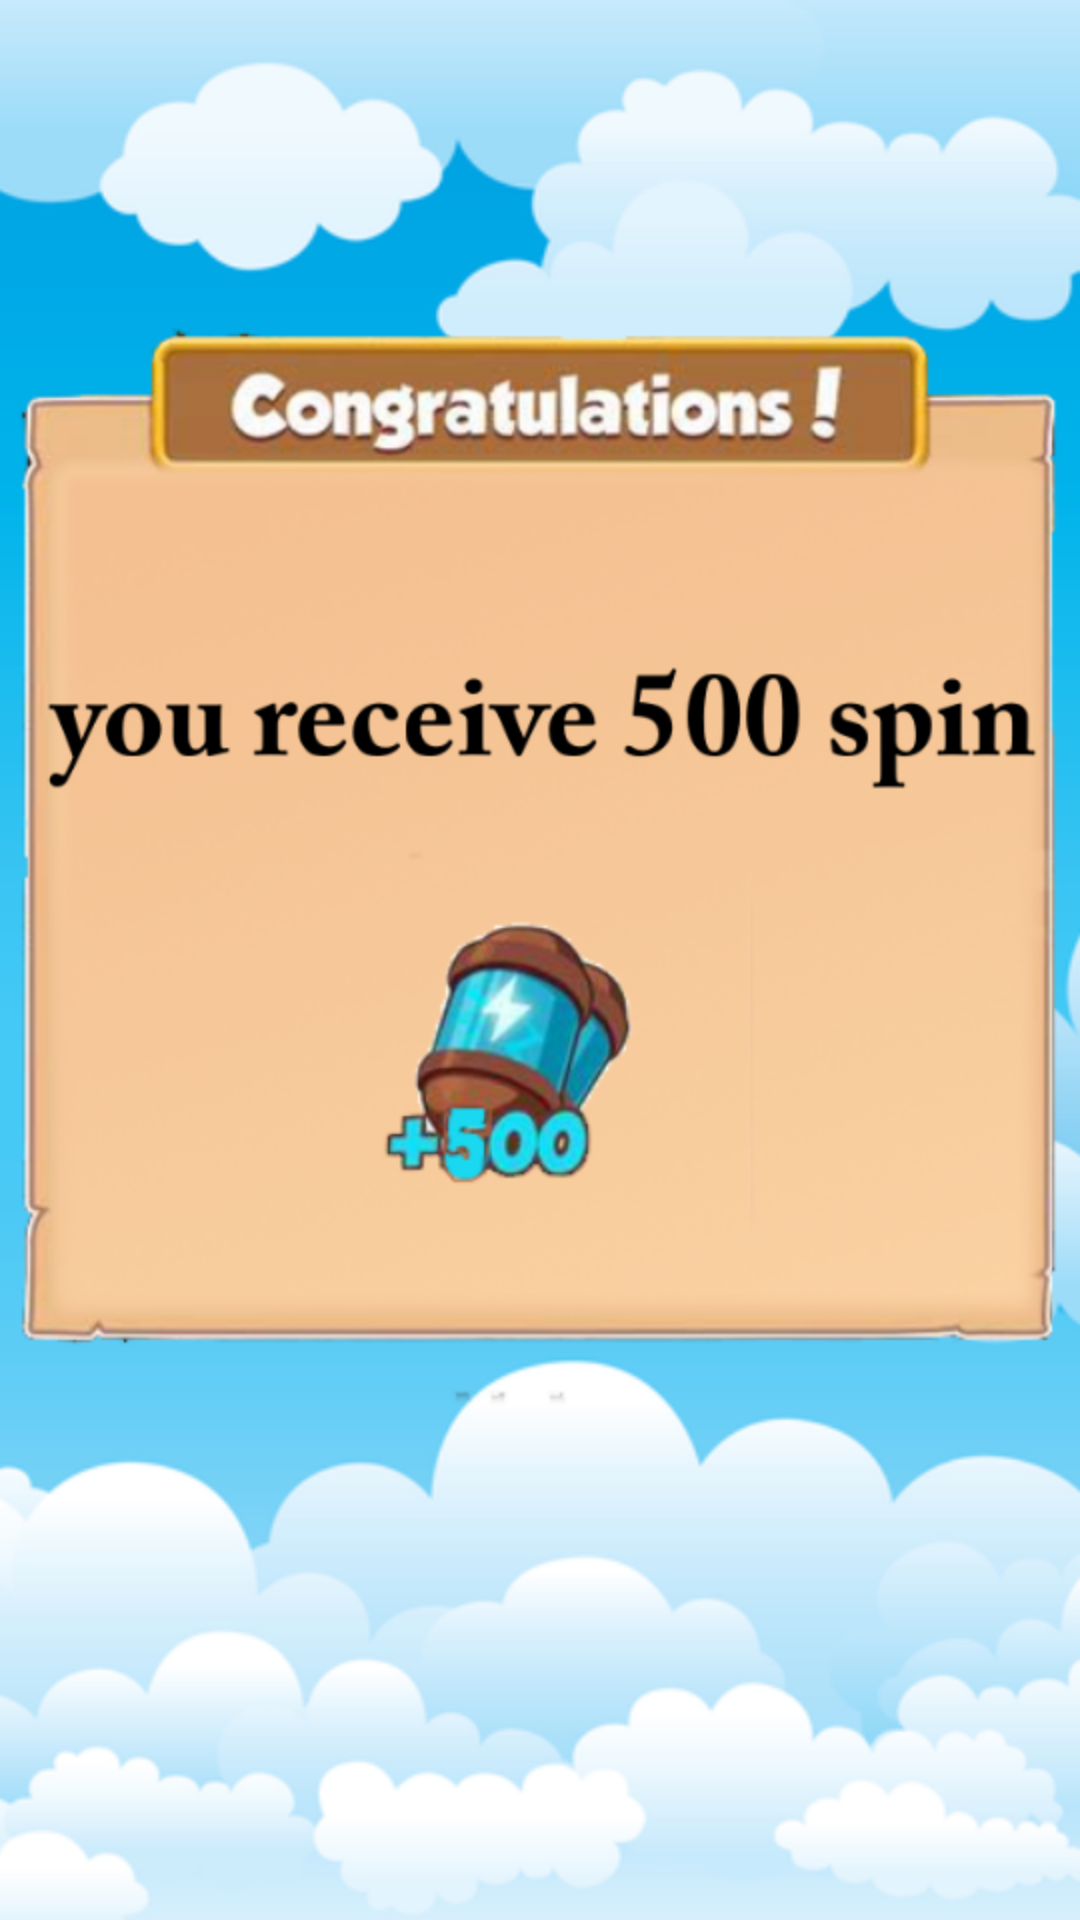 Coin Master Free Spin for Android - APK Download - Coin Master Free Spin poster Coin Master Free Spin screenshot 1 ...